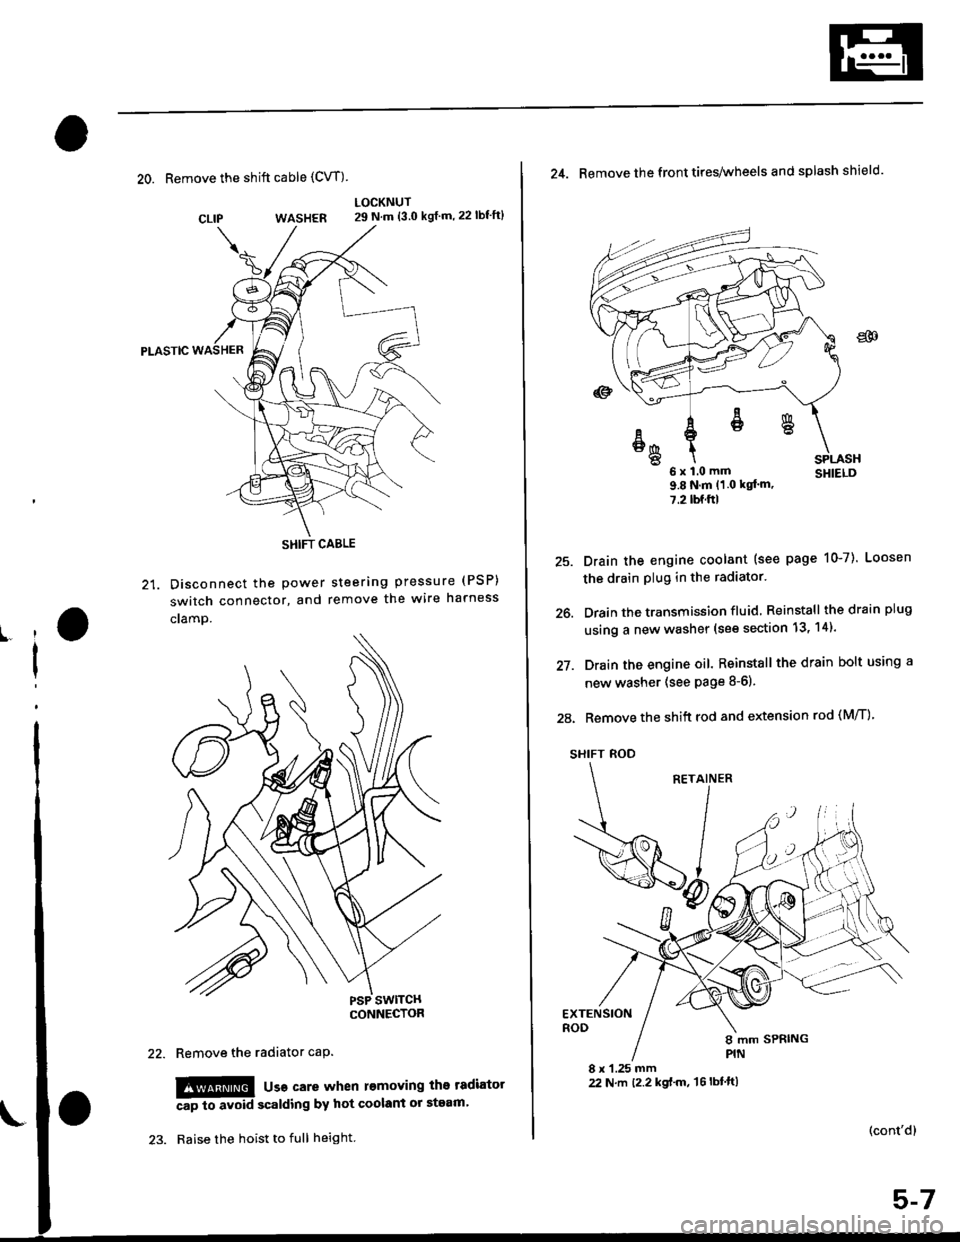 HONDA CIVIC 1997 6.G Workshop Manual 20. Remove the shift cable (CVT)
WASHER
Pt-Aslc
21. Disconnect the Power
switch connector, and
cramp.
LOCKNUT29 N.m {3.0 kgf m,22lbfft}
steering pressure (PSP)
remove the wire harness
CLIP
ll
I
Remov